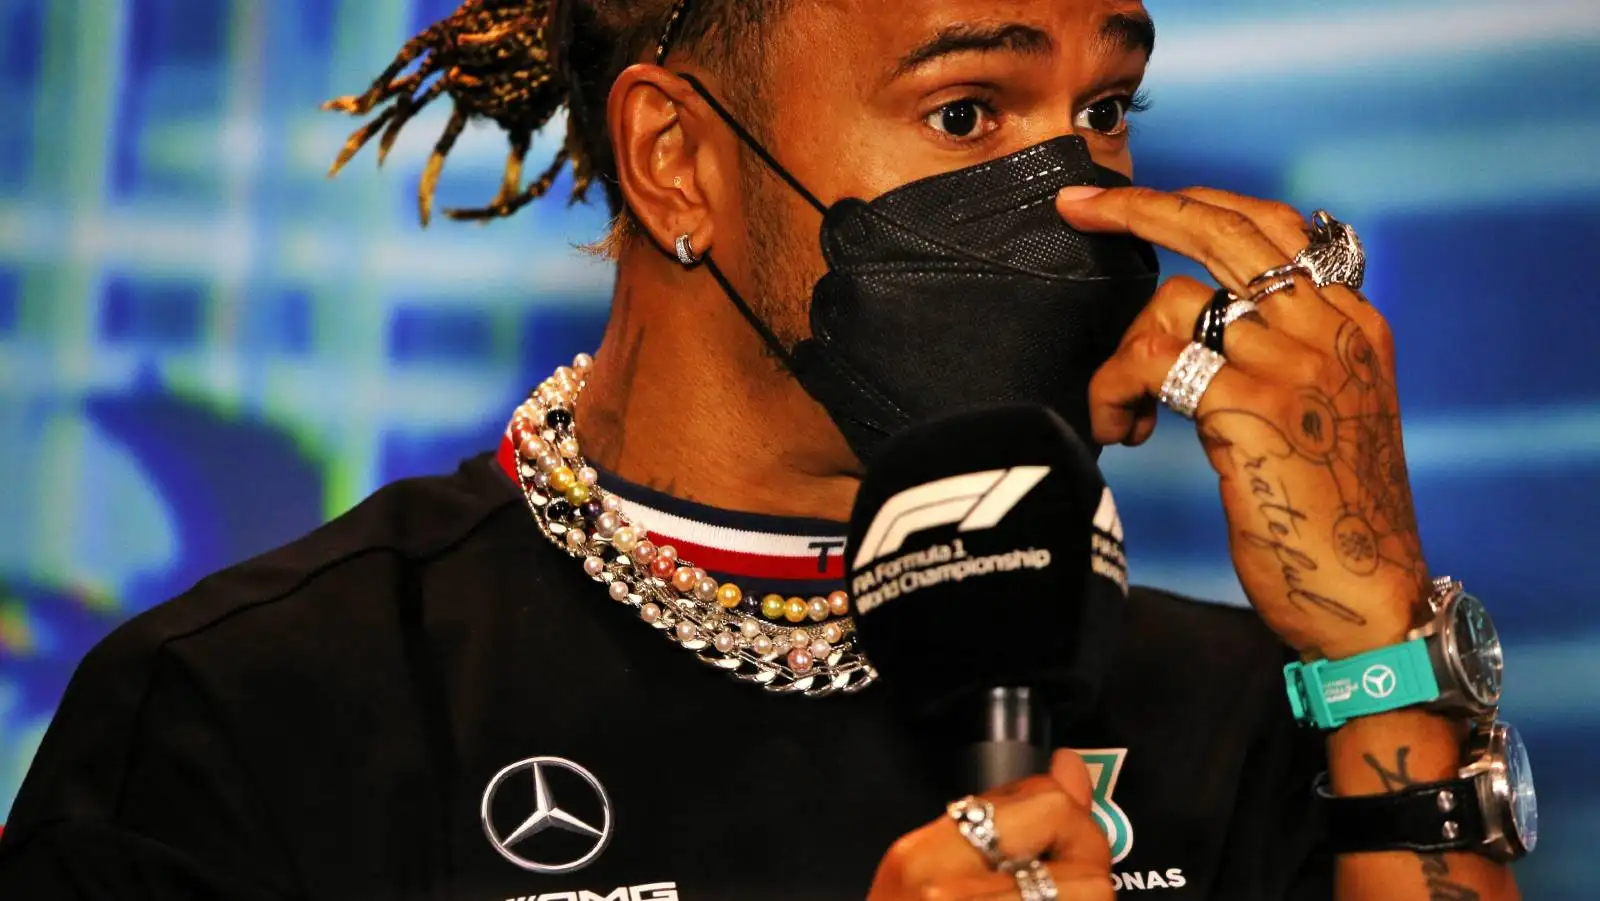 Lewis Hamilton with lots of jewellery on display. Miami May 2022.